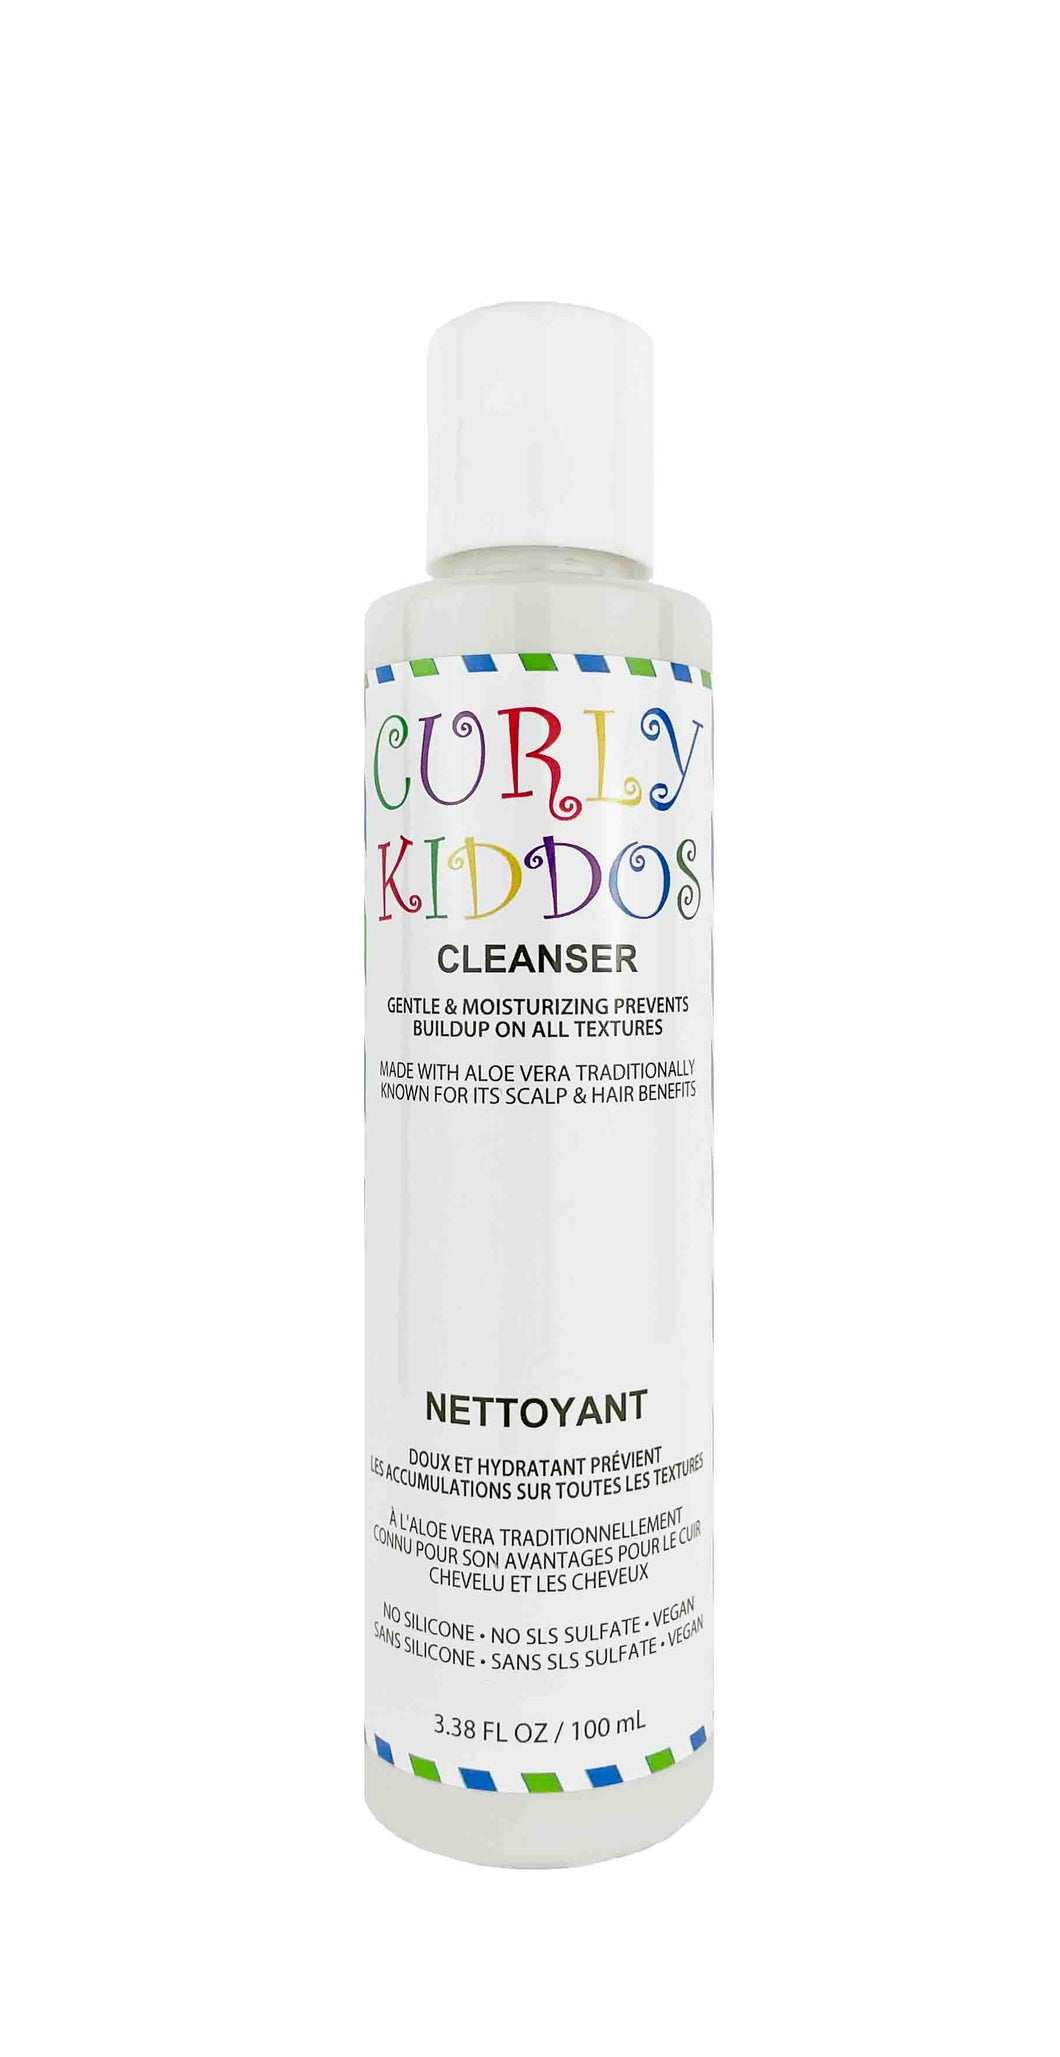 Curly Kiddos Cleanser